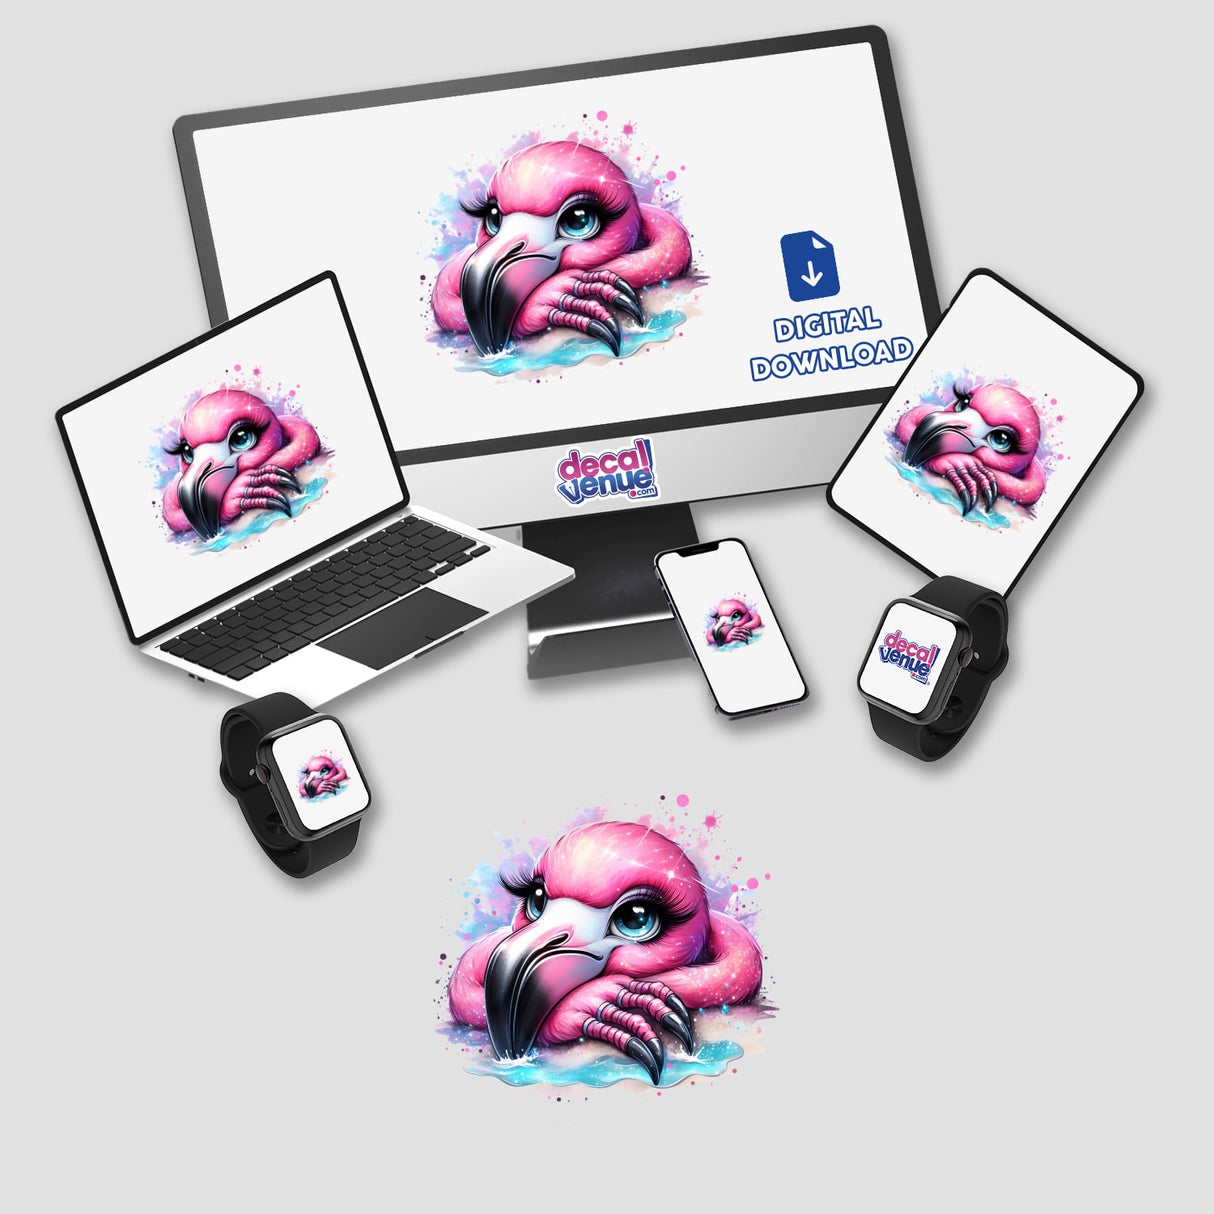 Vibrant pink flamingo digital artwork with watercolor splashes featured on various digital devices